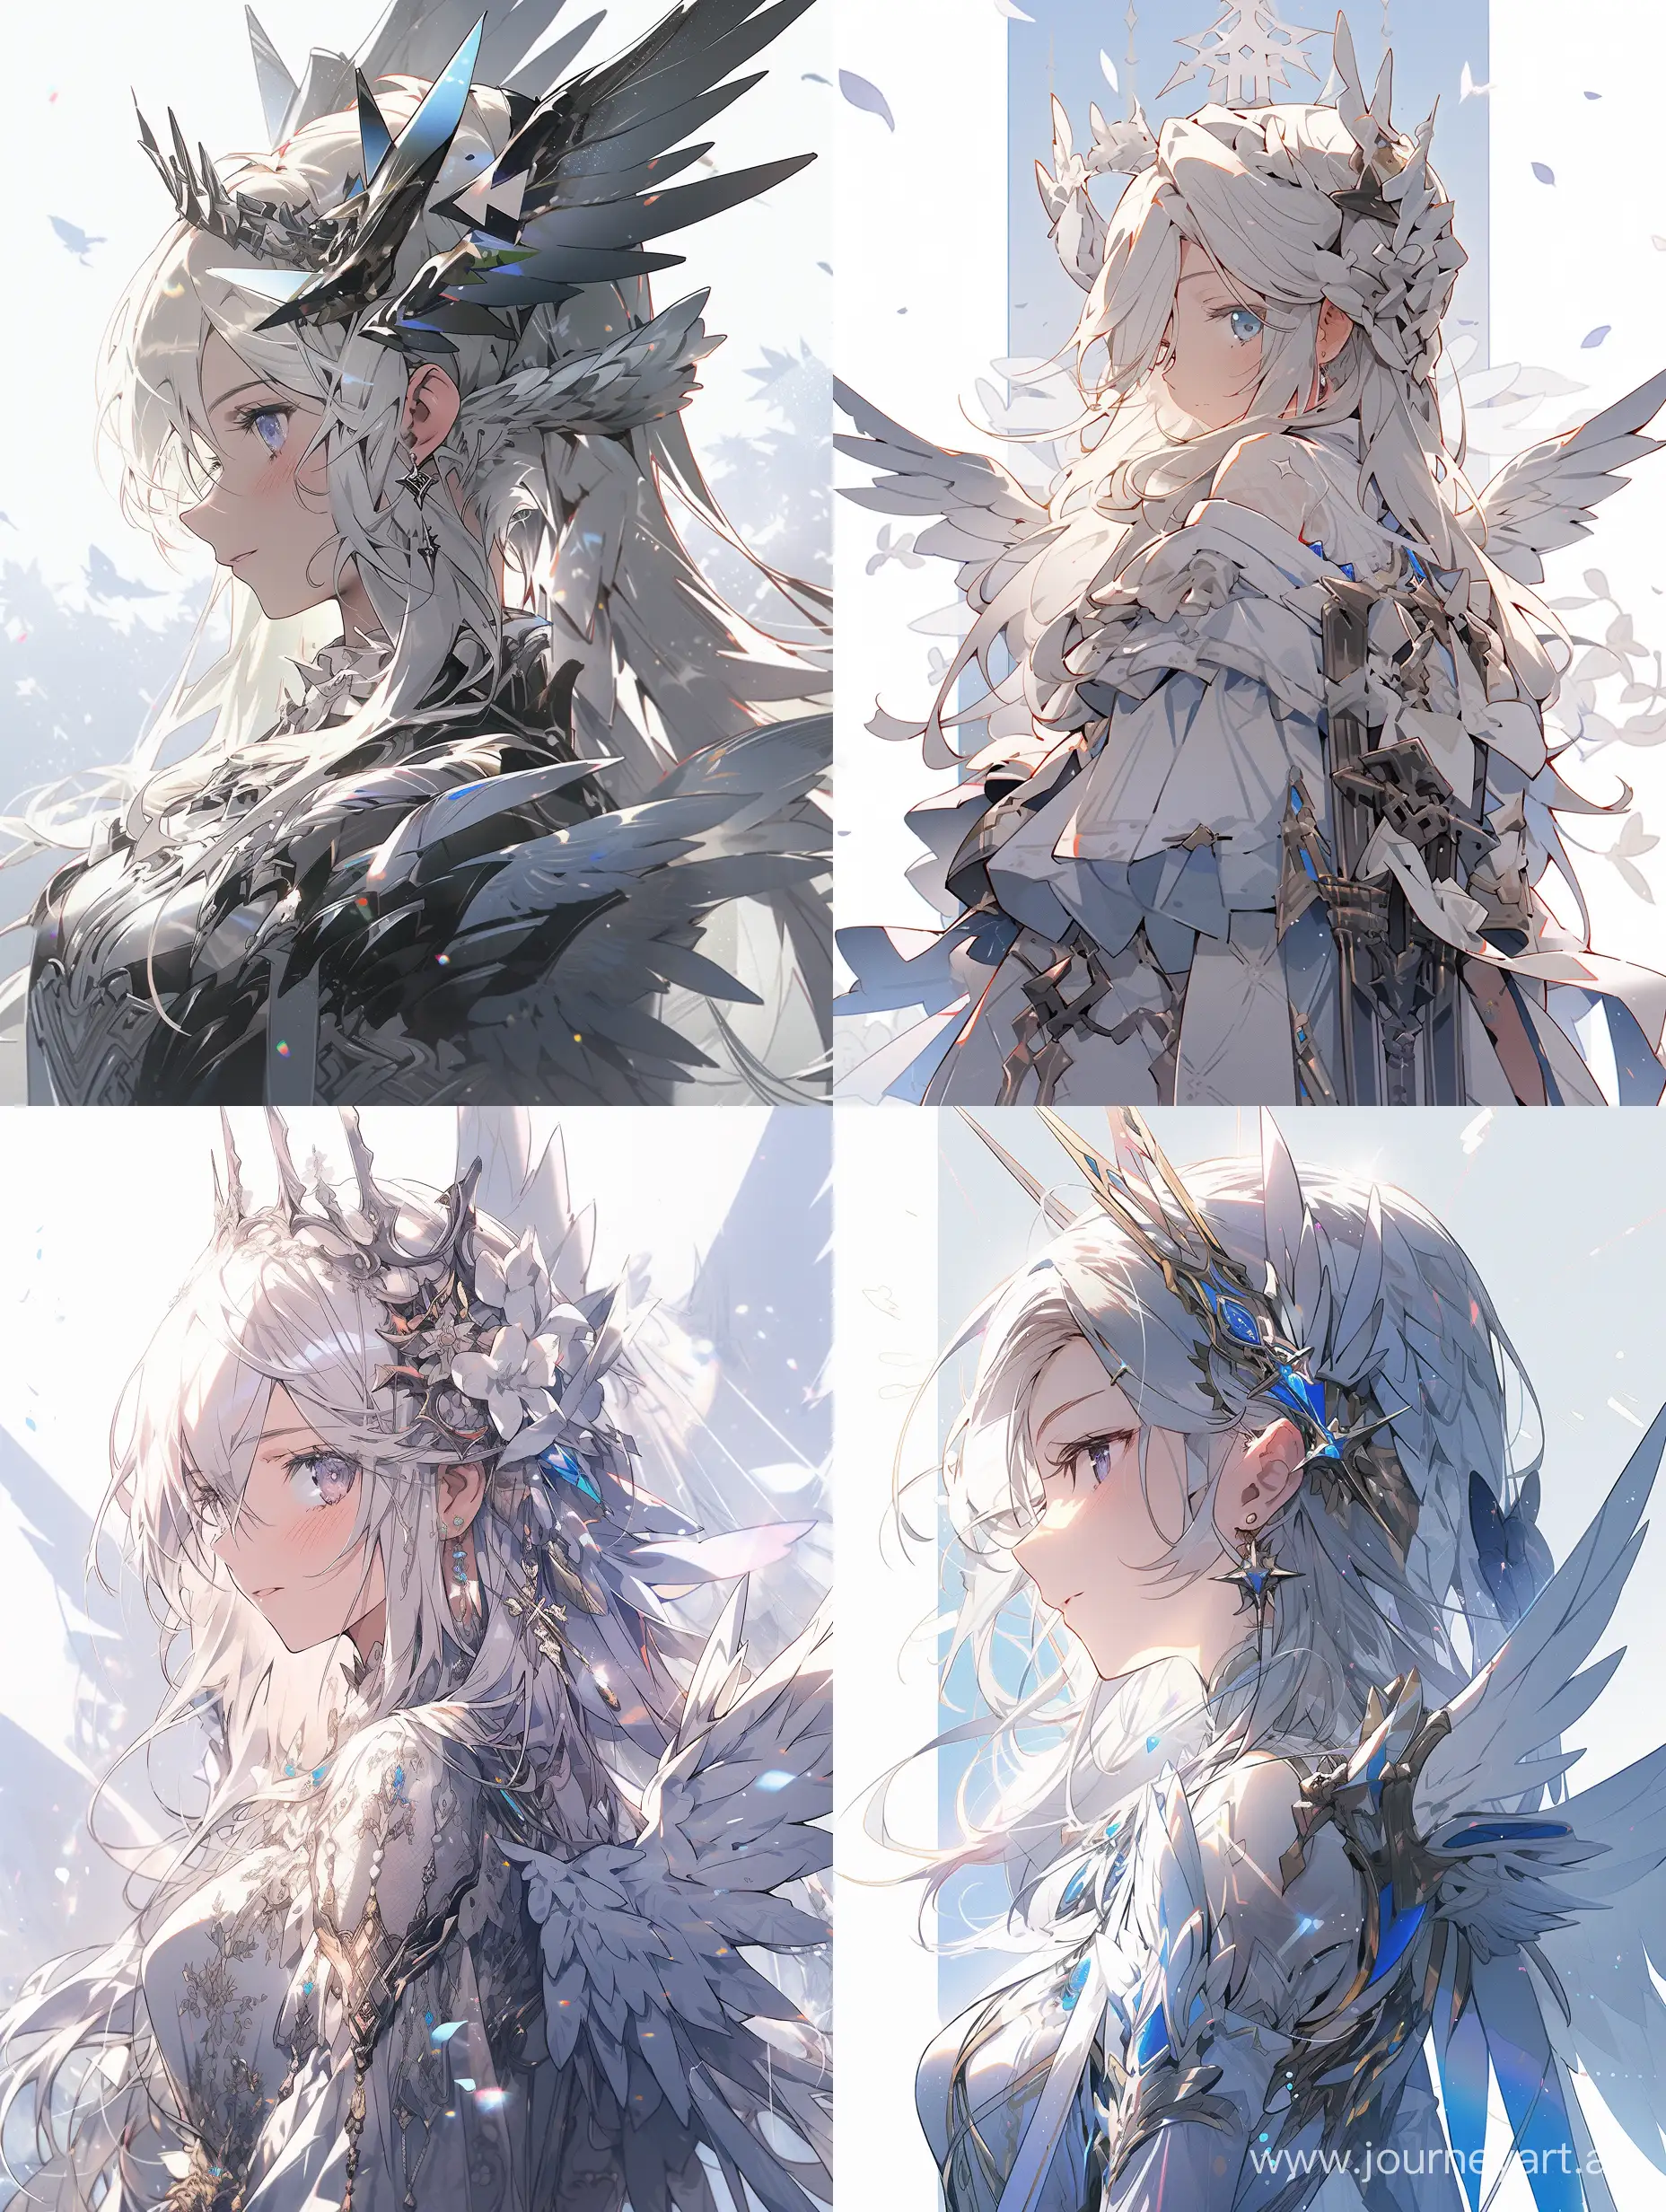 Majestic-White-Angel-with-Spread-Wings-Against-a-Heavenly-Sky